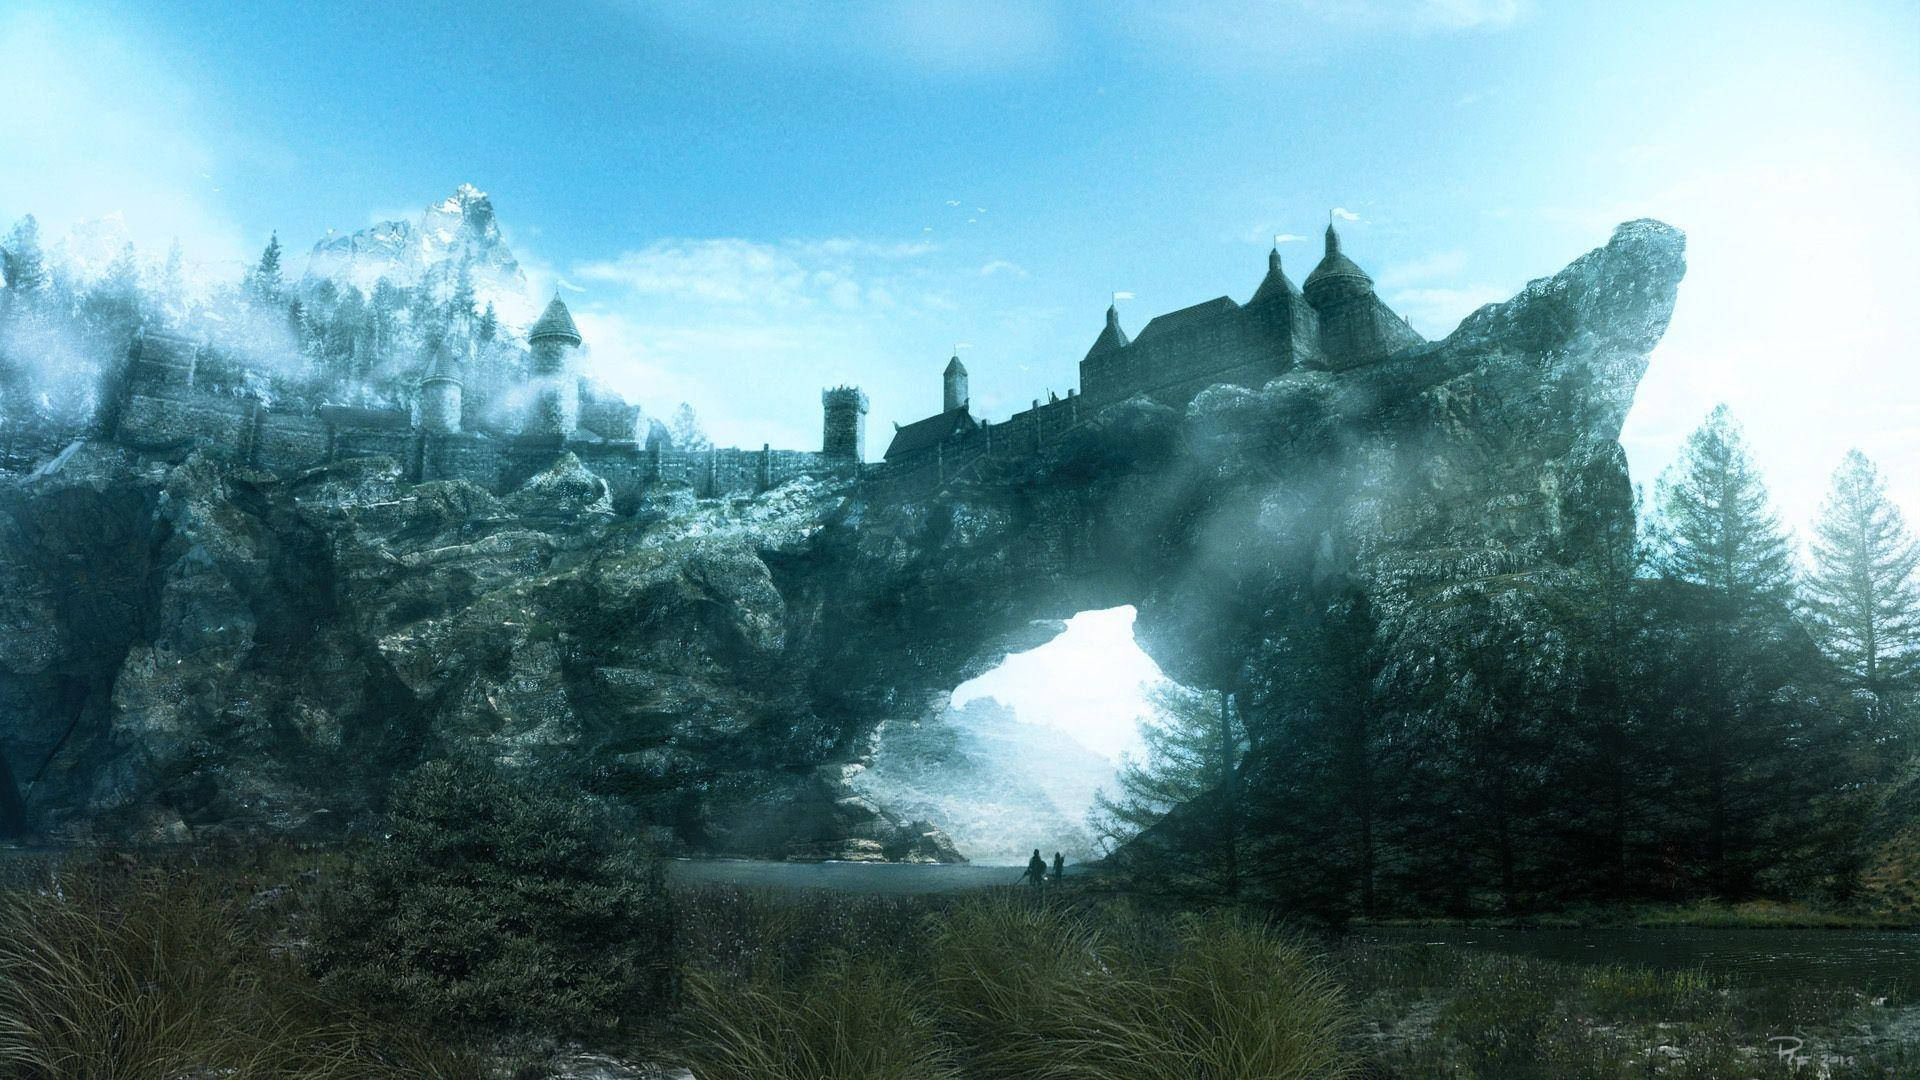 One of the most beautiful landscapes in The Elder Scrolls V: Skyrim Wallpaper